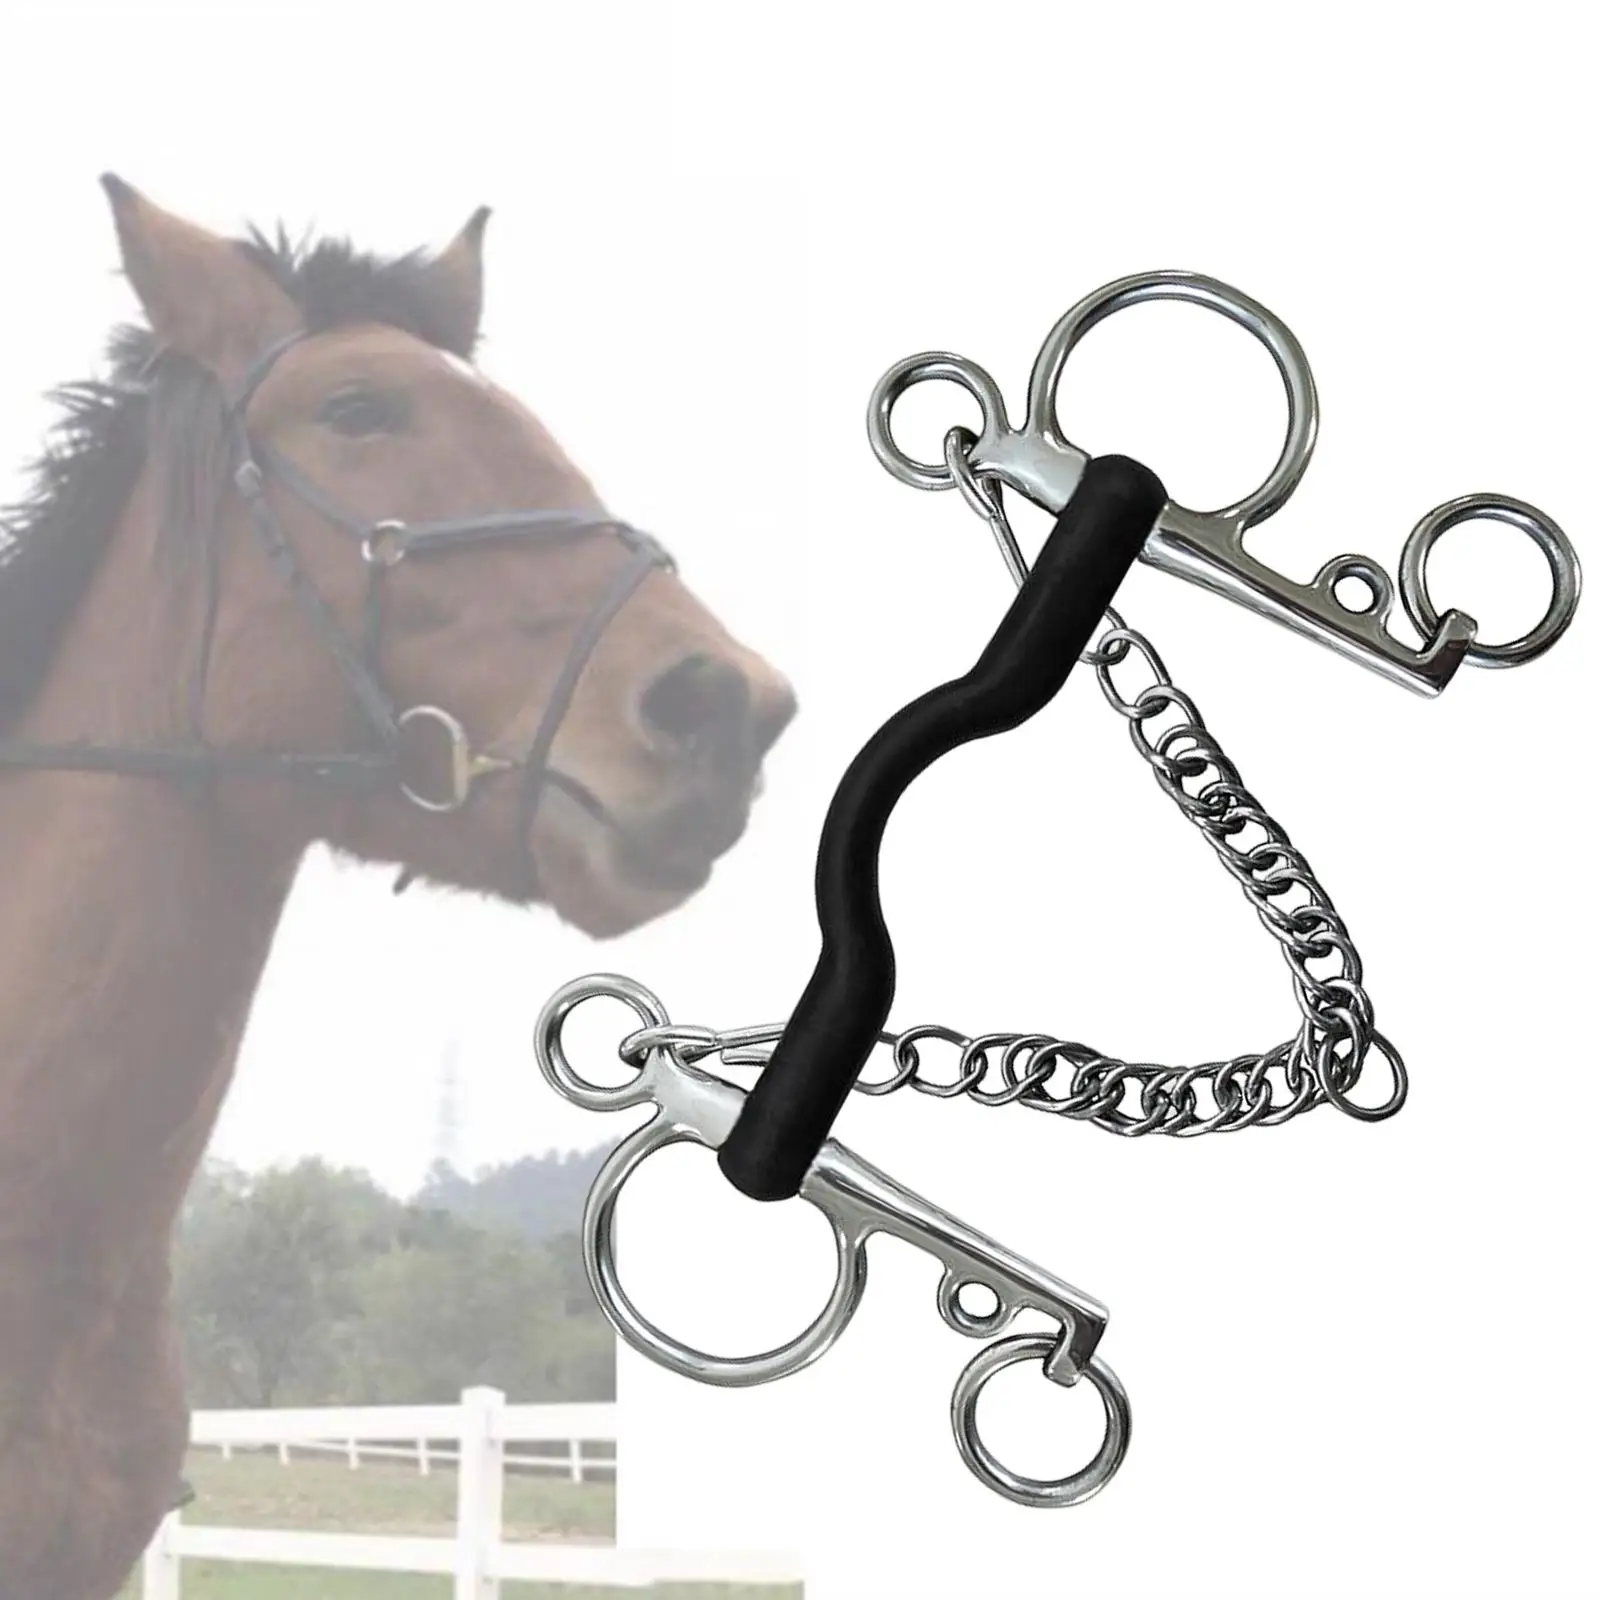 Western Style Horse Bit, W/Curb Hooks Chain, Mouth Horse